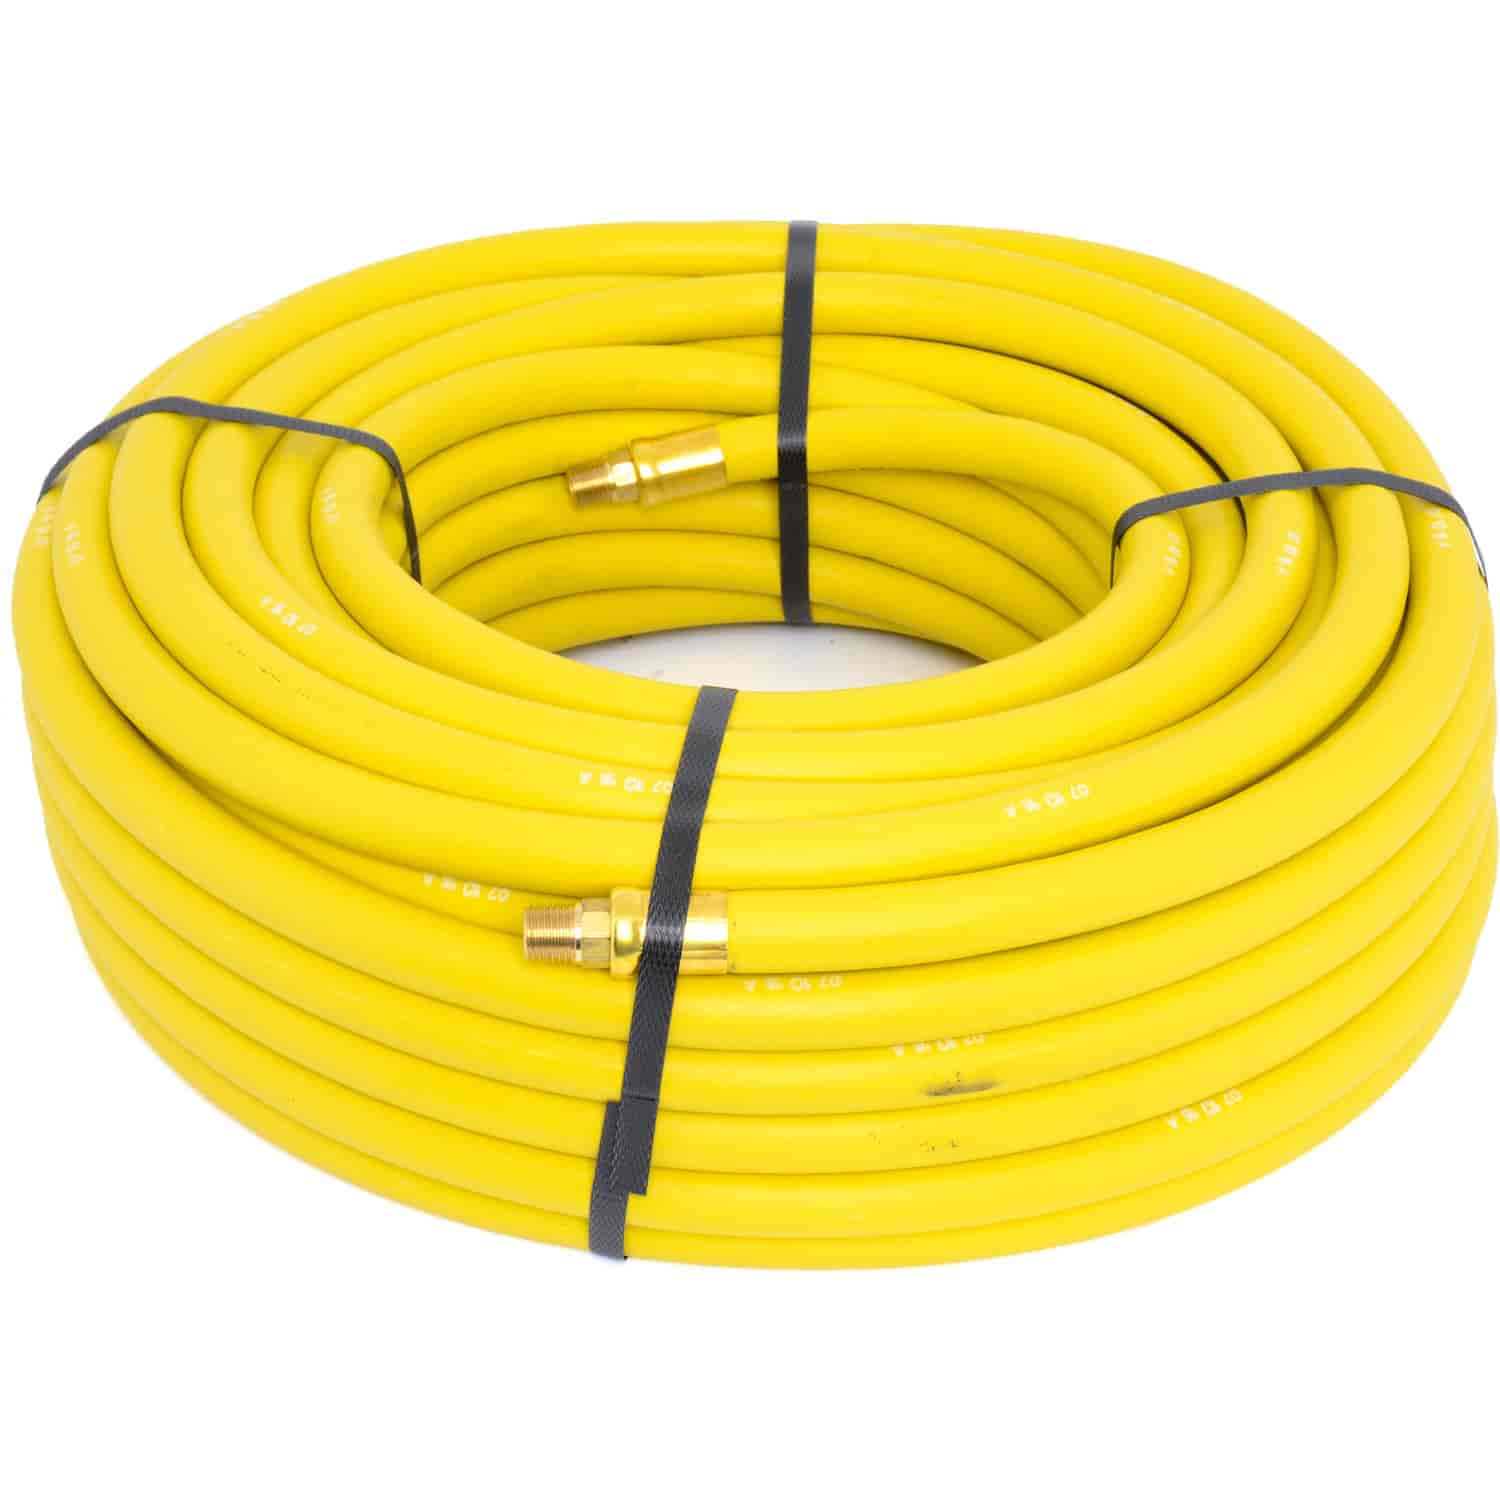 Yellow Rubber Air Hose 3/8"